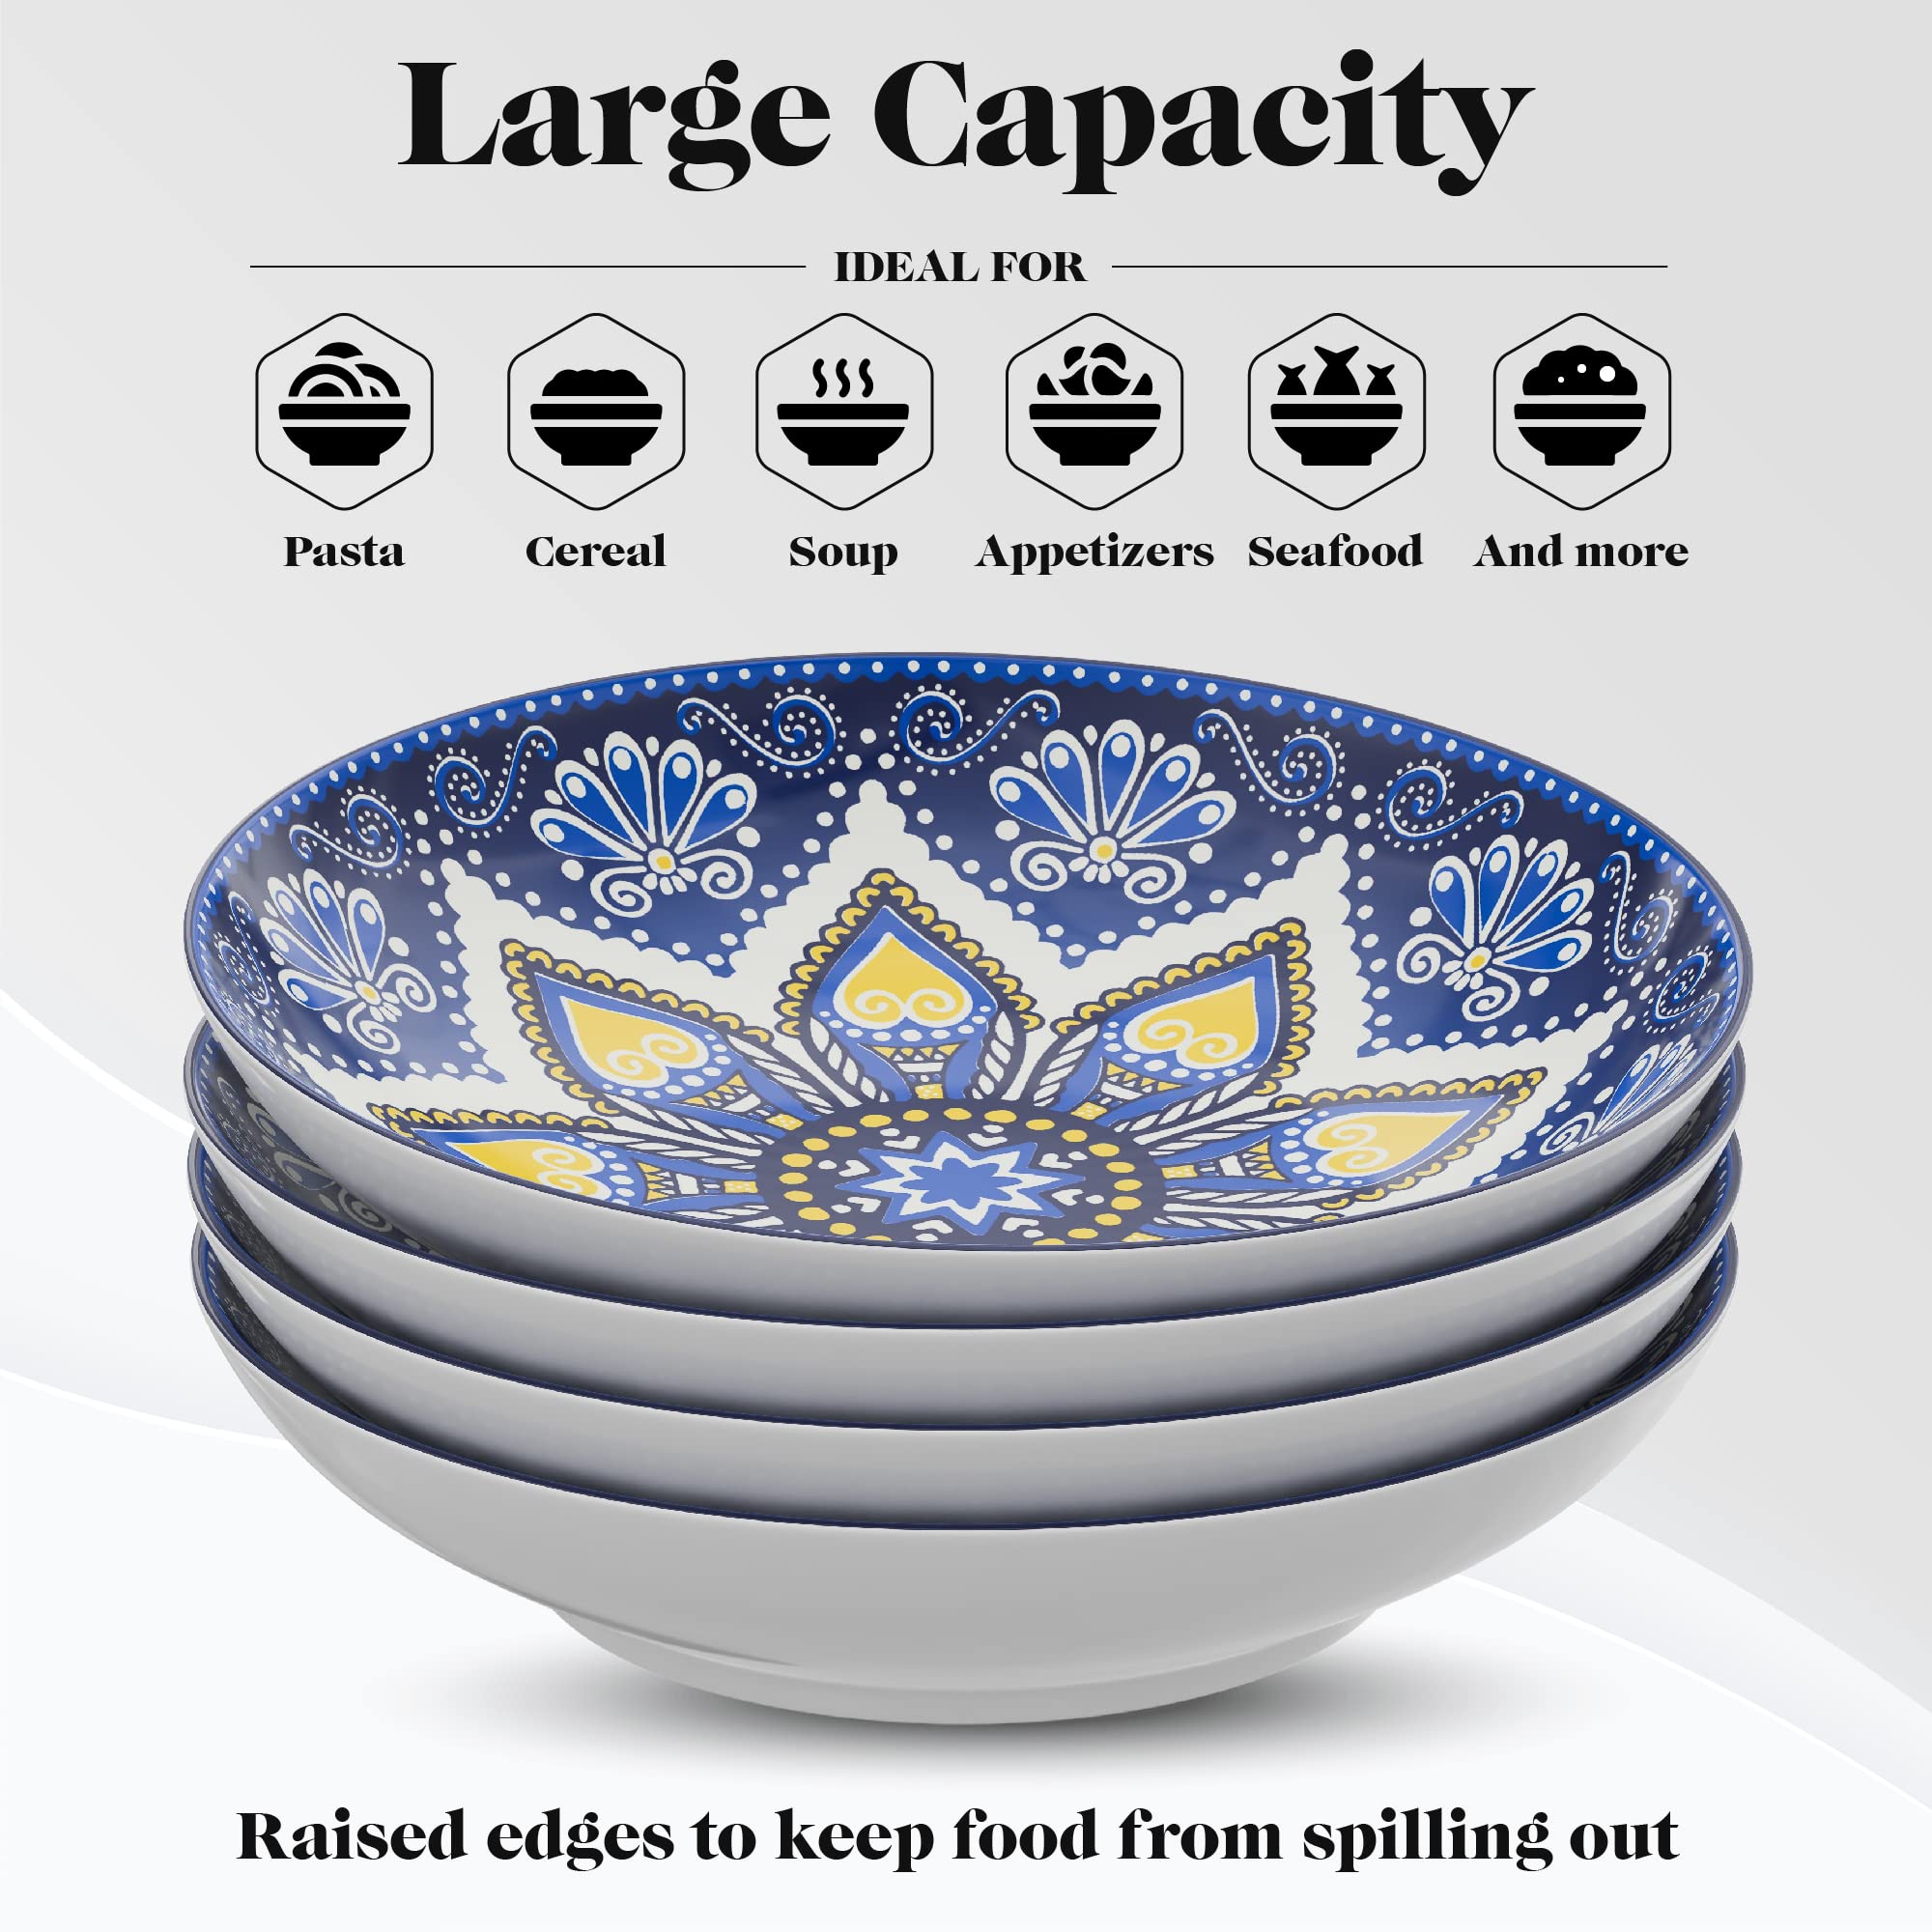 American Atelier Pasta Bowls | Set of 4 | Large, 9-inch, Dinner Serving Plates | Wide and Shallow Bowls Set for Pasta, Salad, Soup, Spaghetti, Stews, or Cereal | Blue & Yellow Medallion Motif